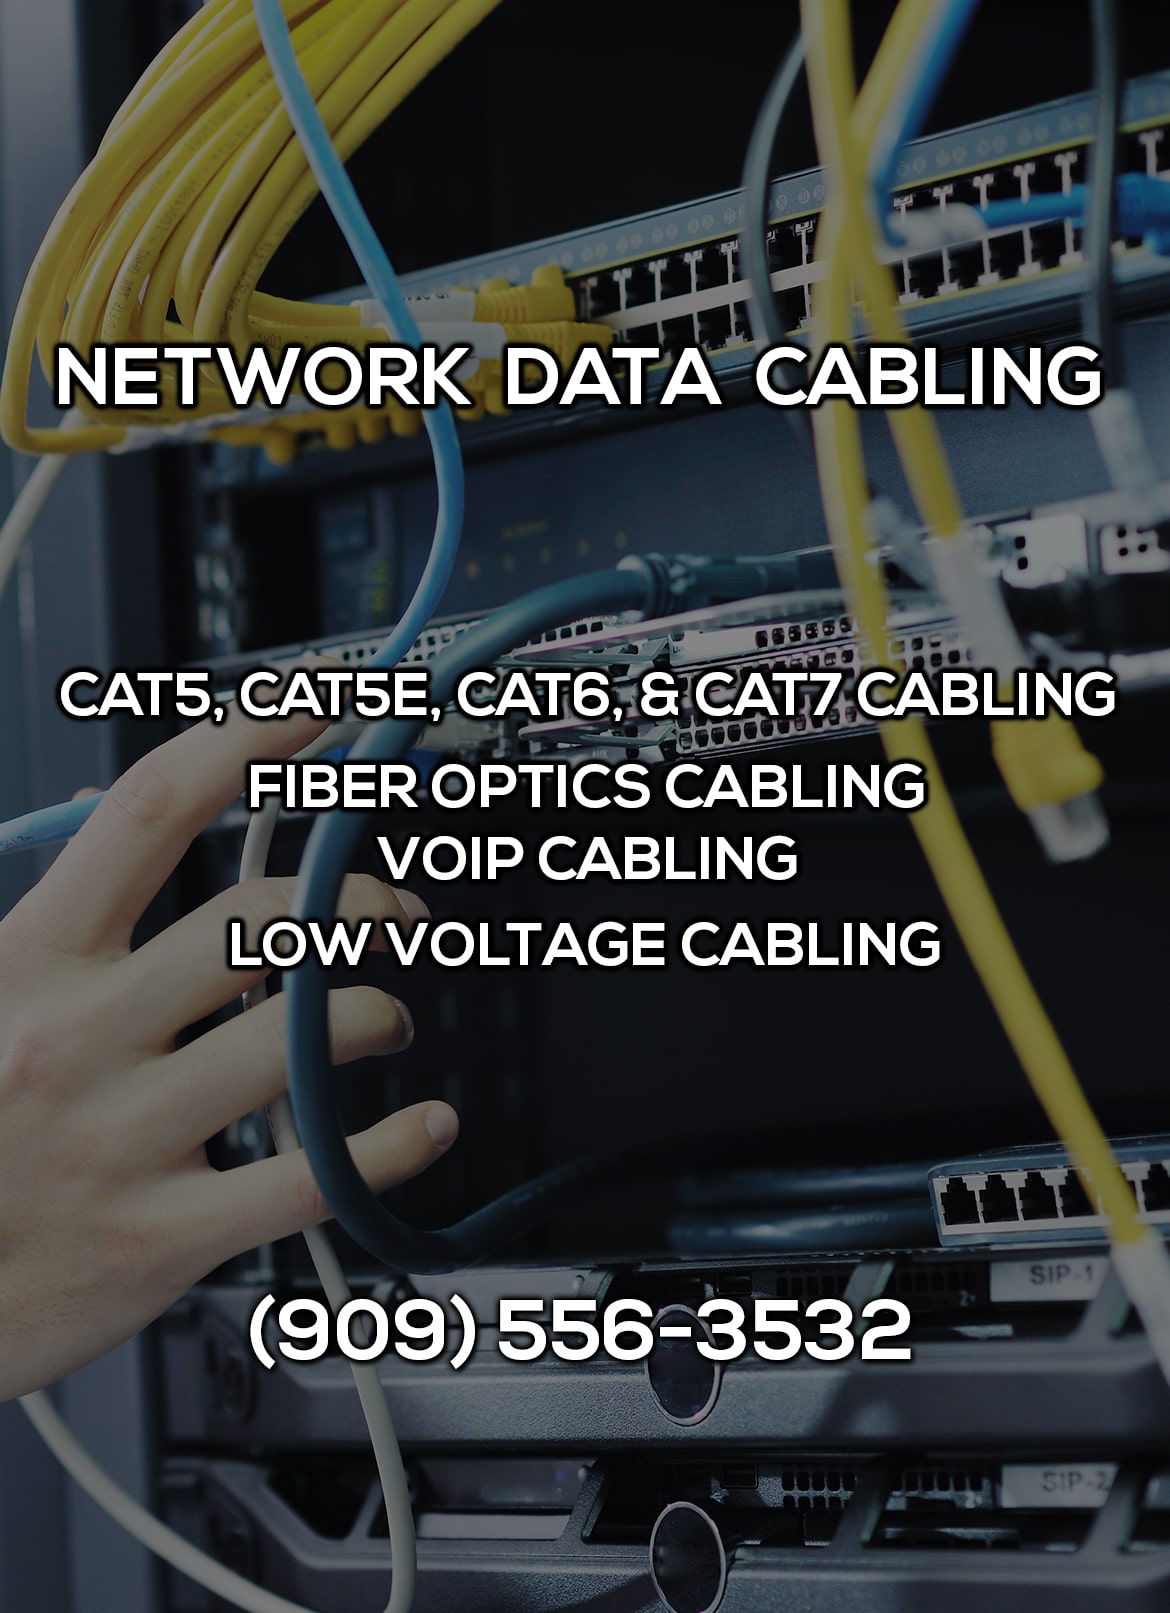 Network Data Cabling in Moreno Valley CA